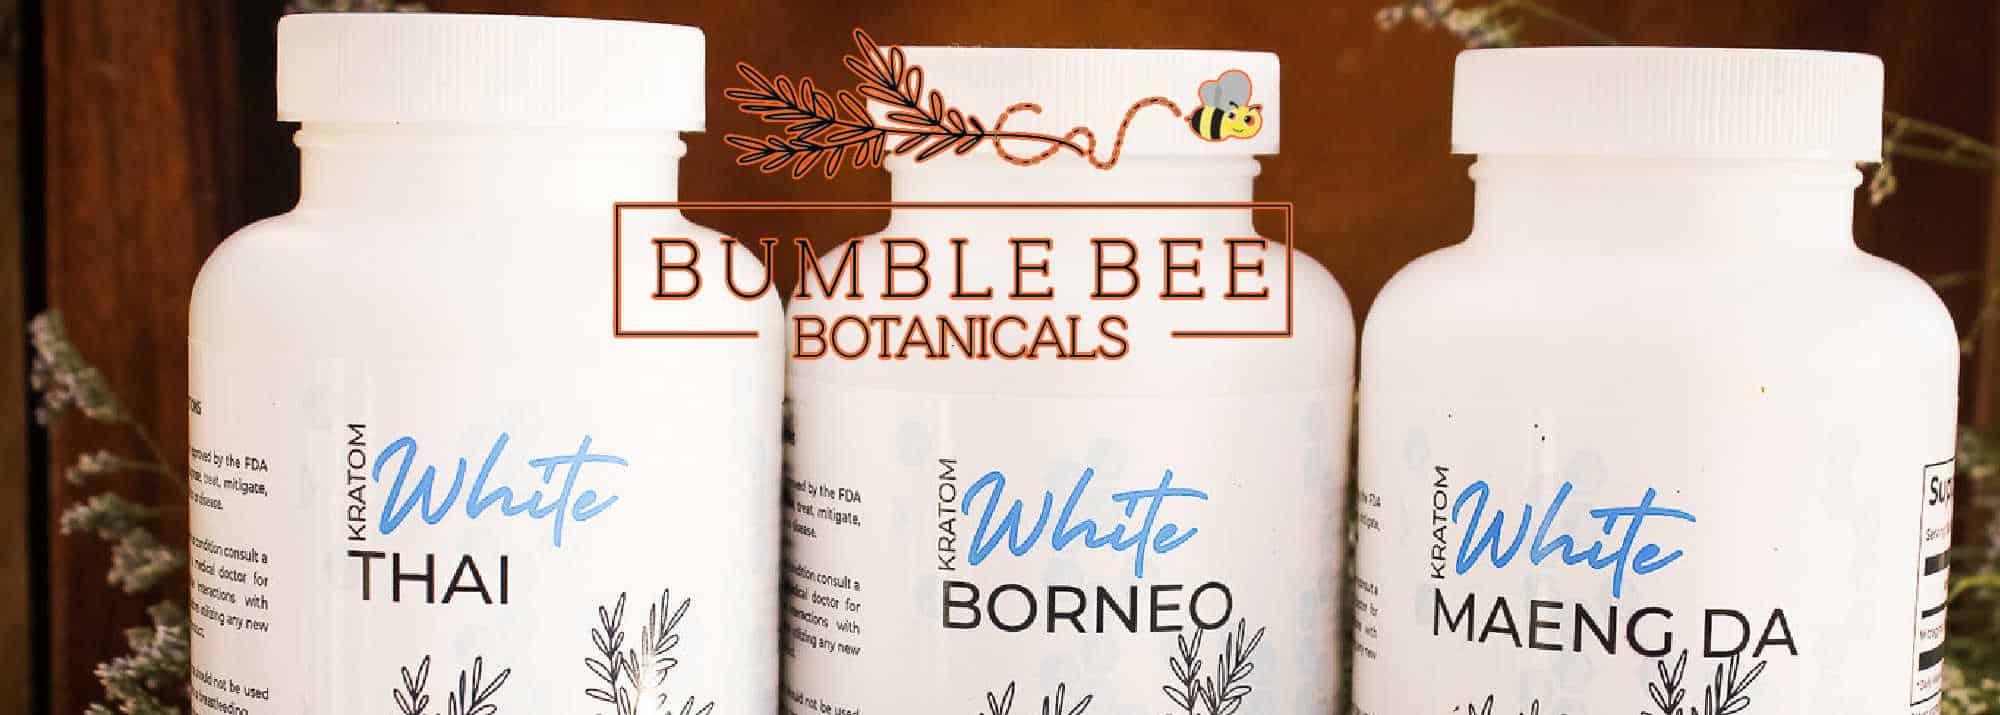 image of bumble bee botanicals product line